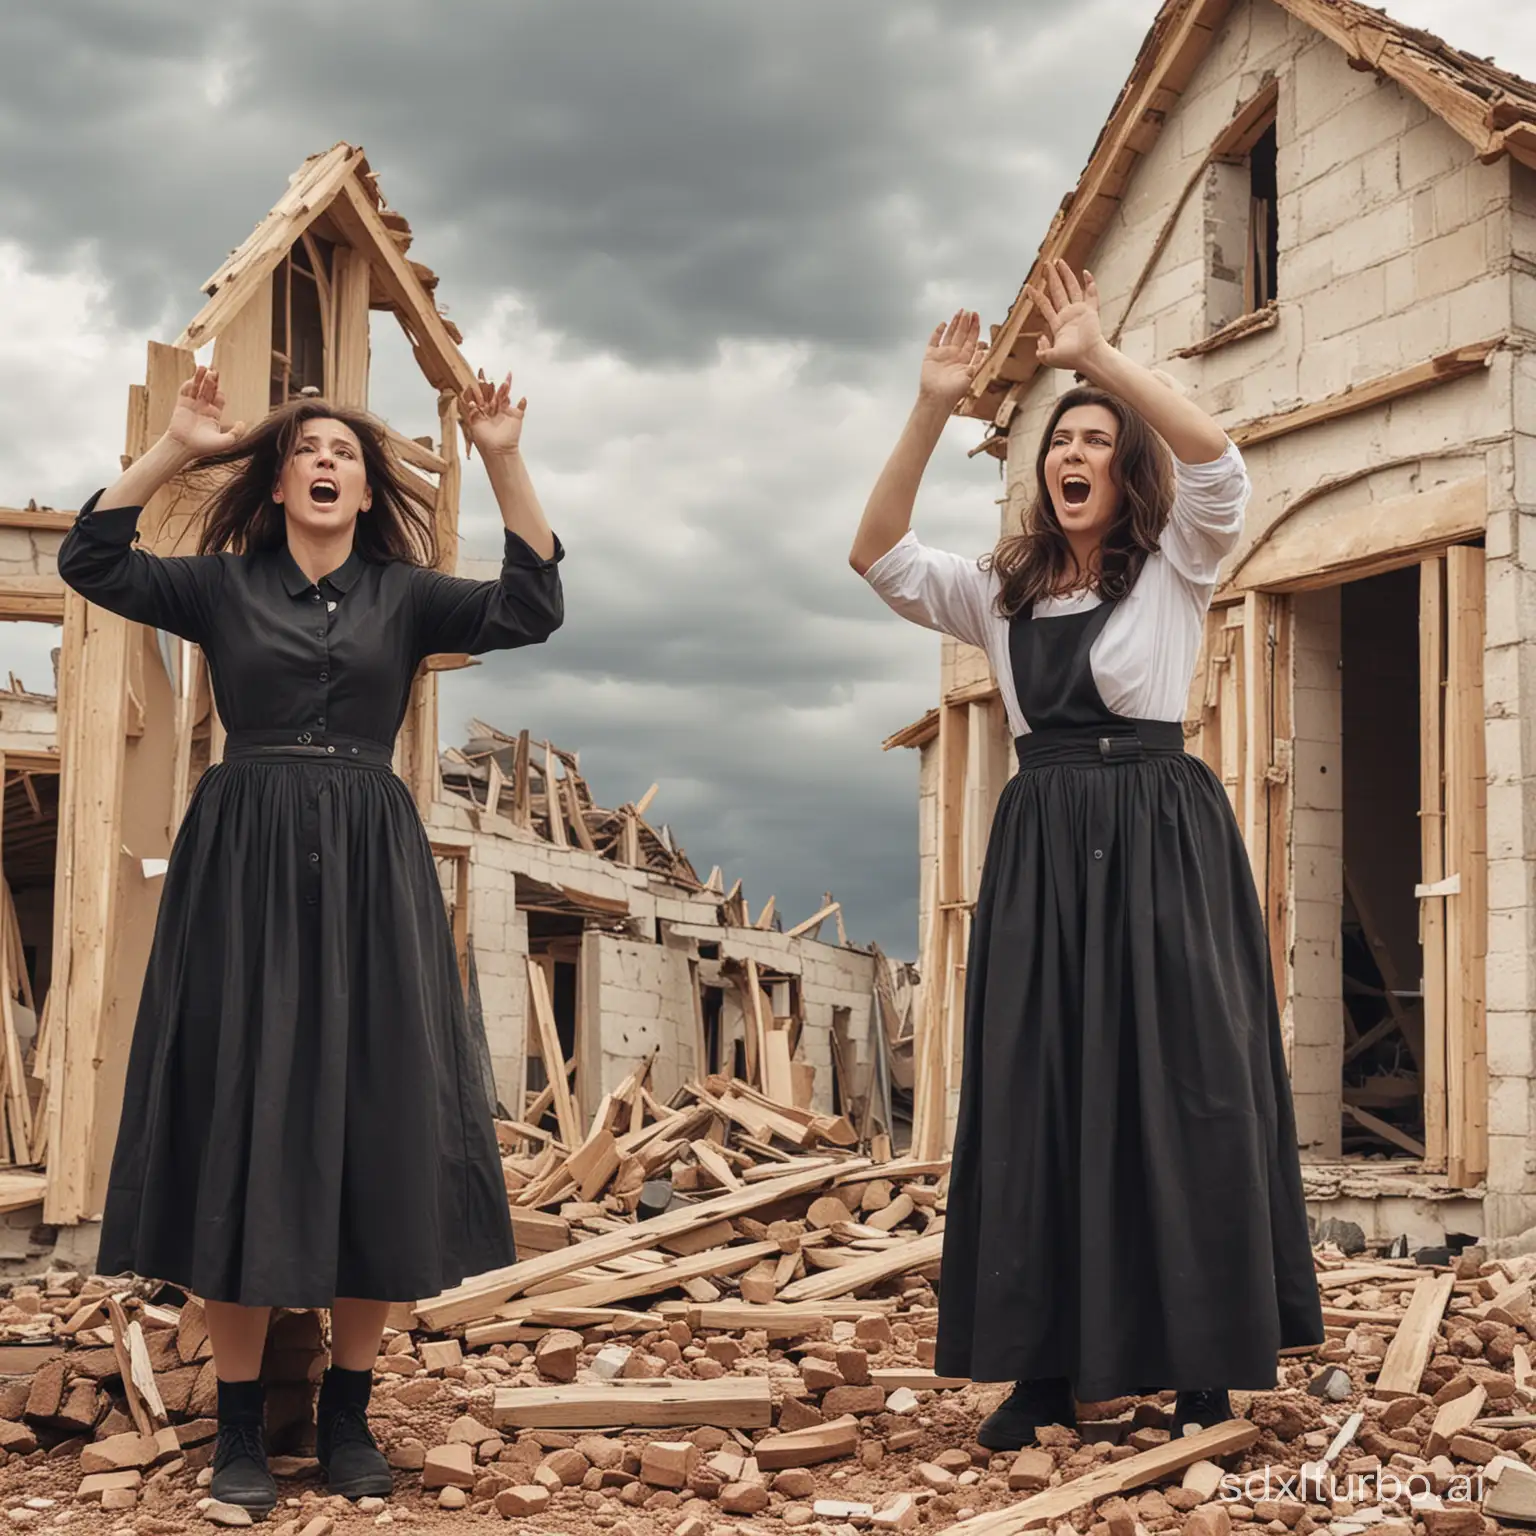 the contrast of two women one wise woman building her house and another foolish woman tearing down her house with her own hands